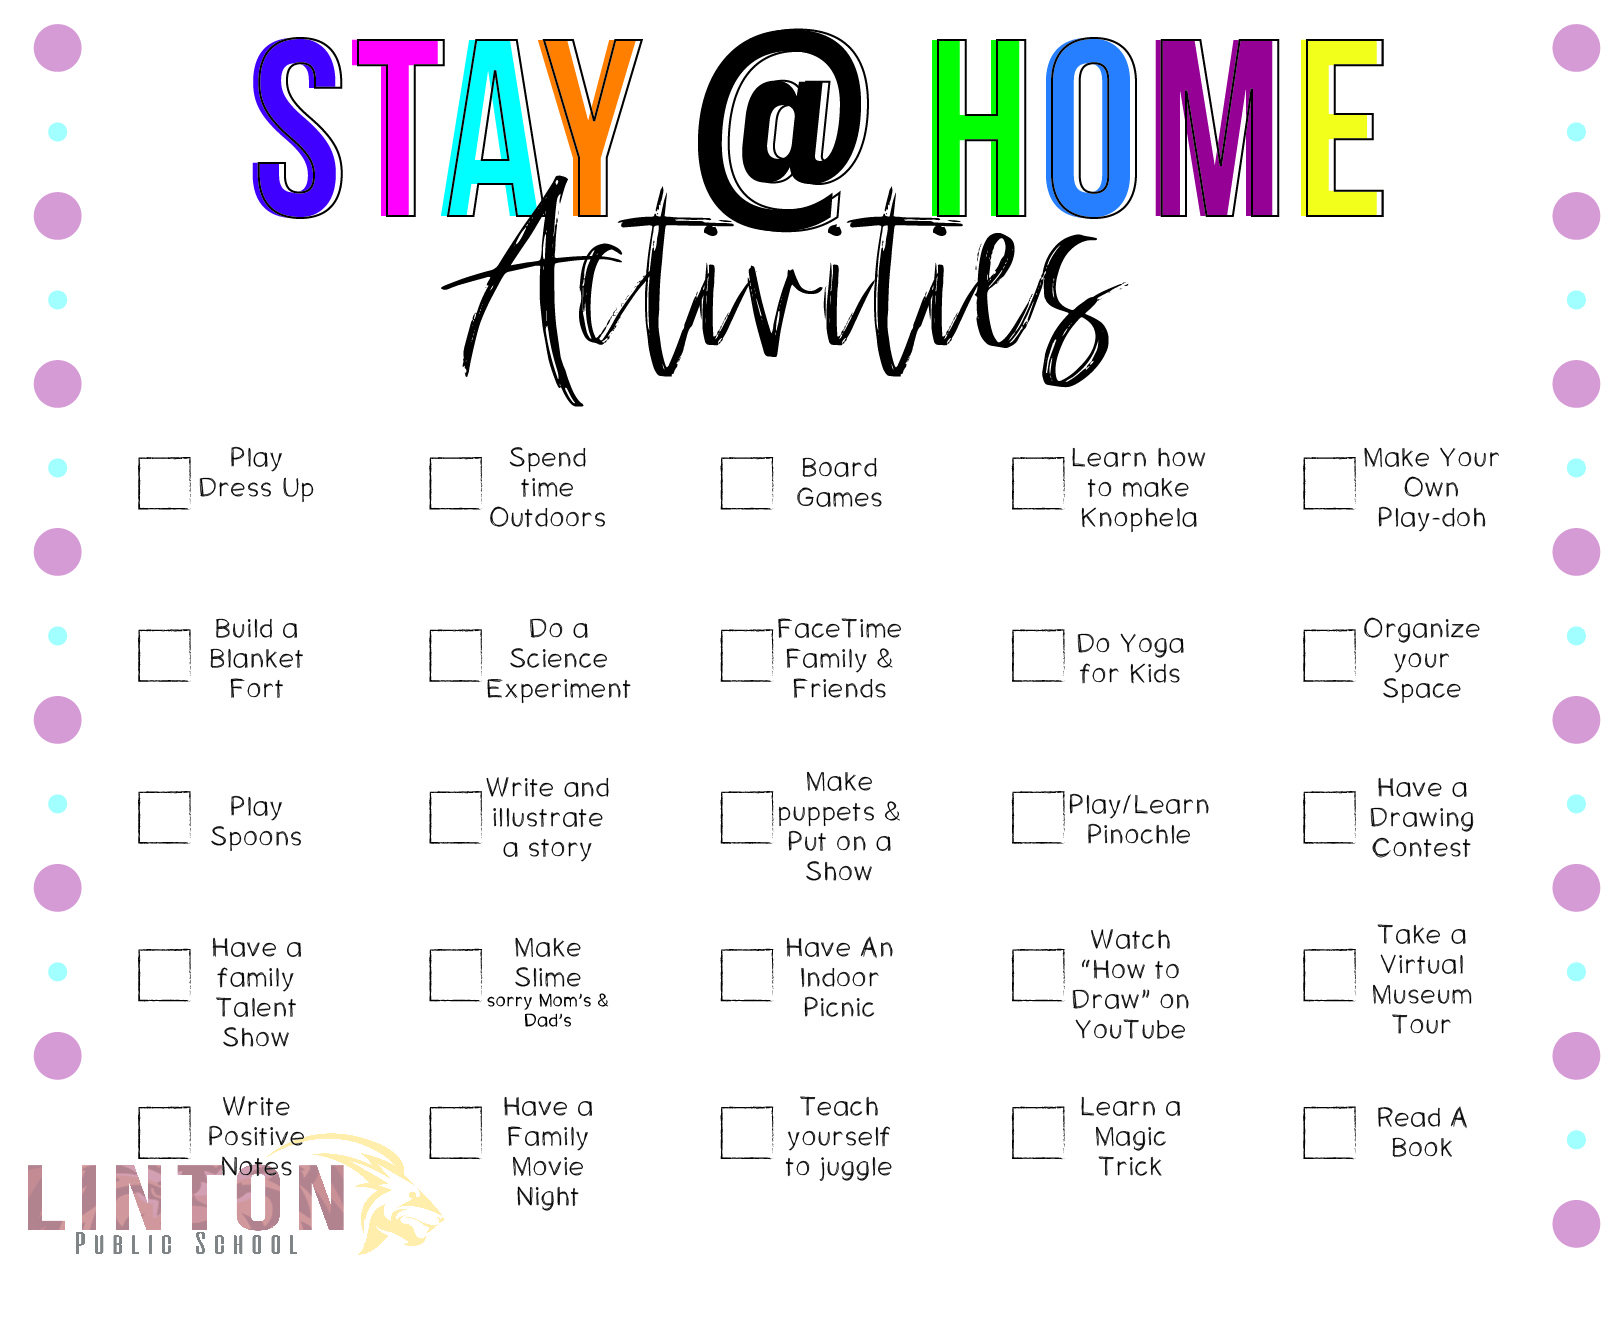 STAY HOME - ACTIVITIES